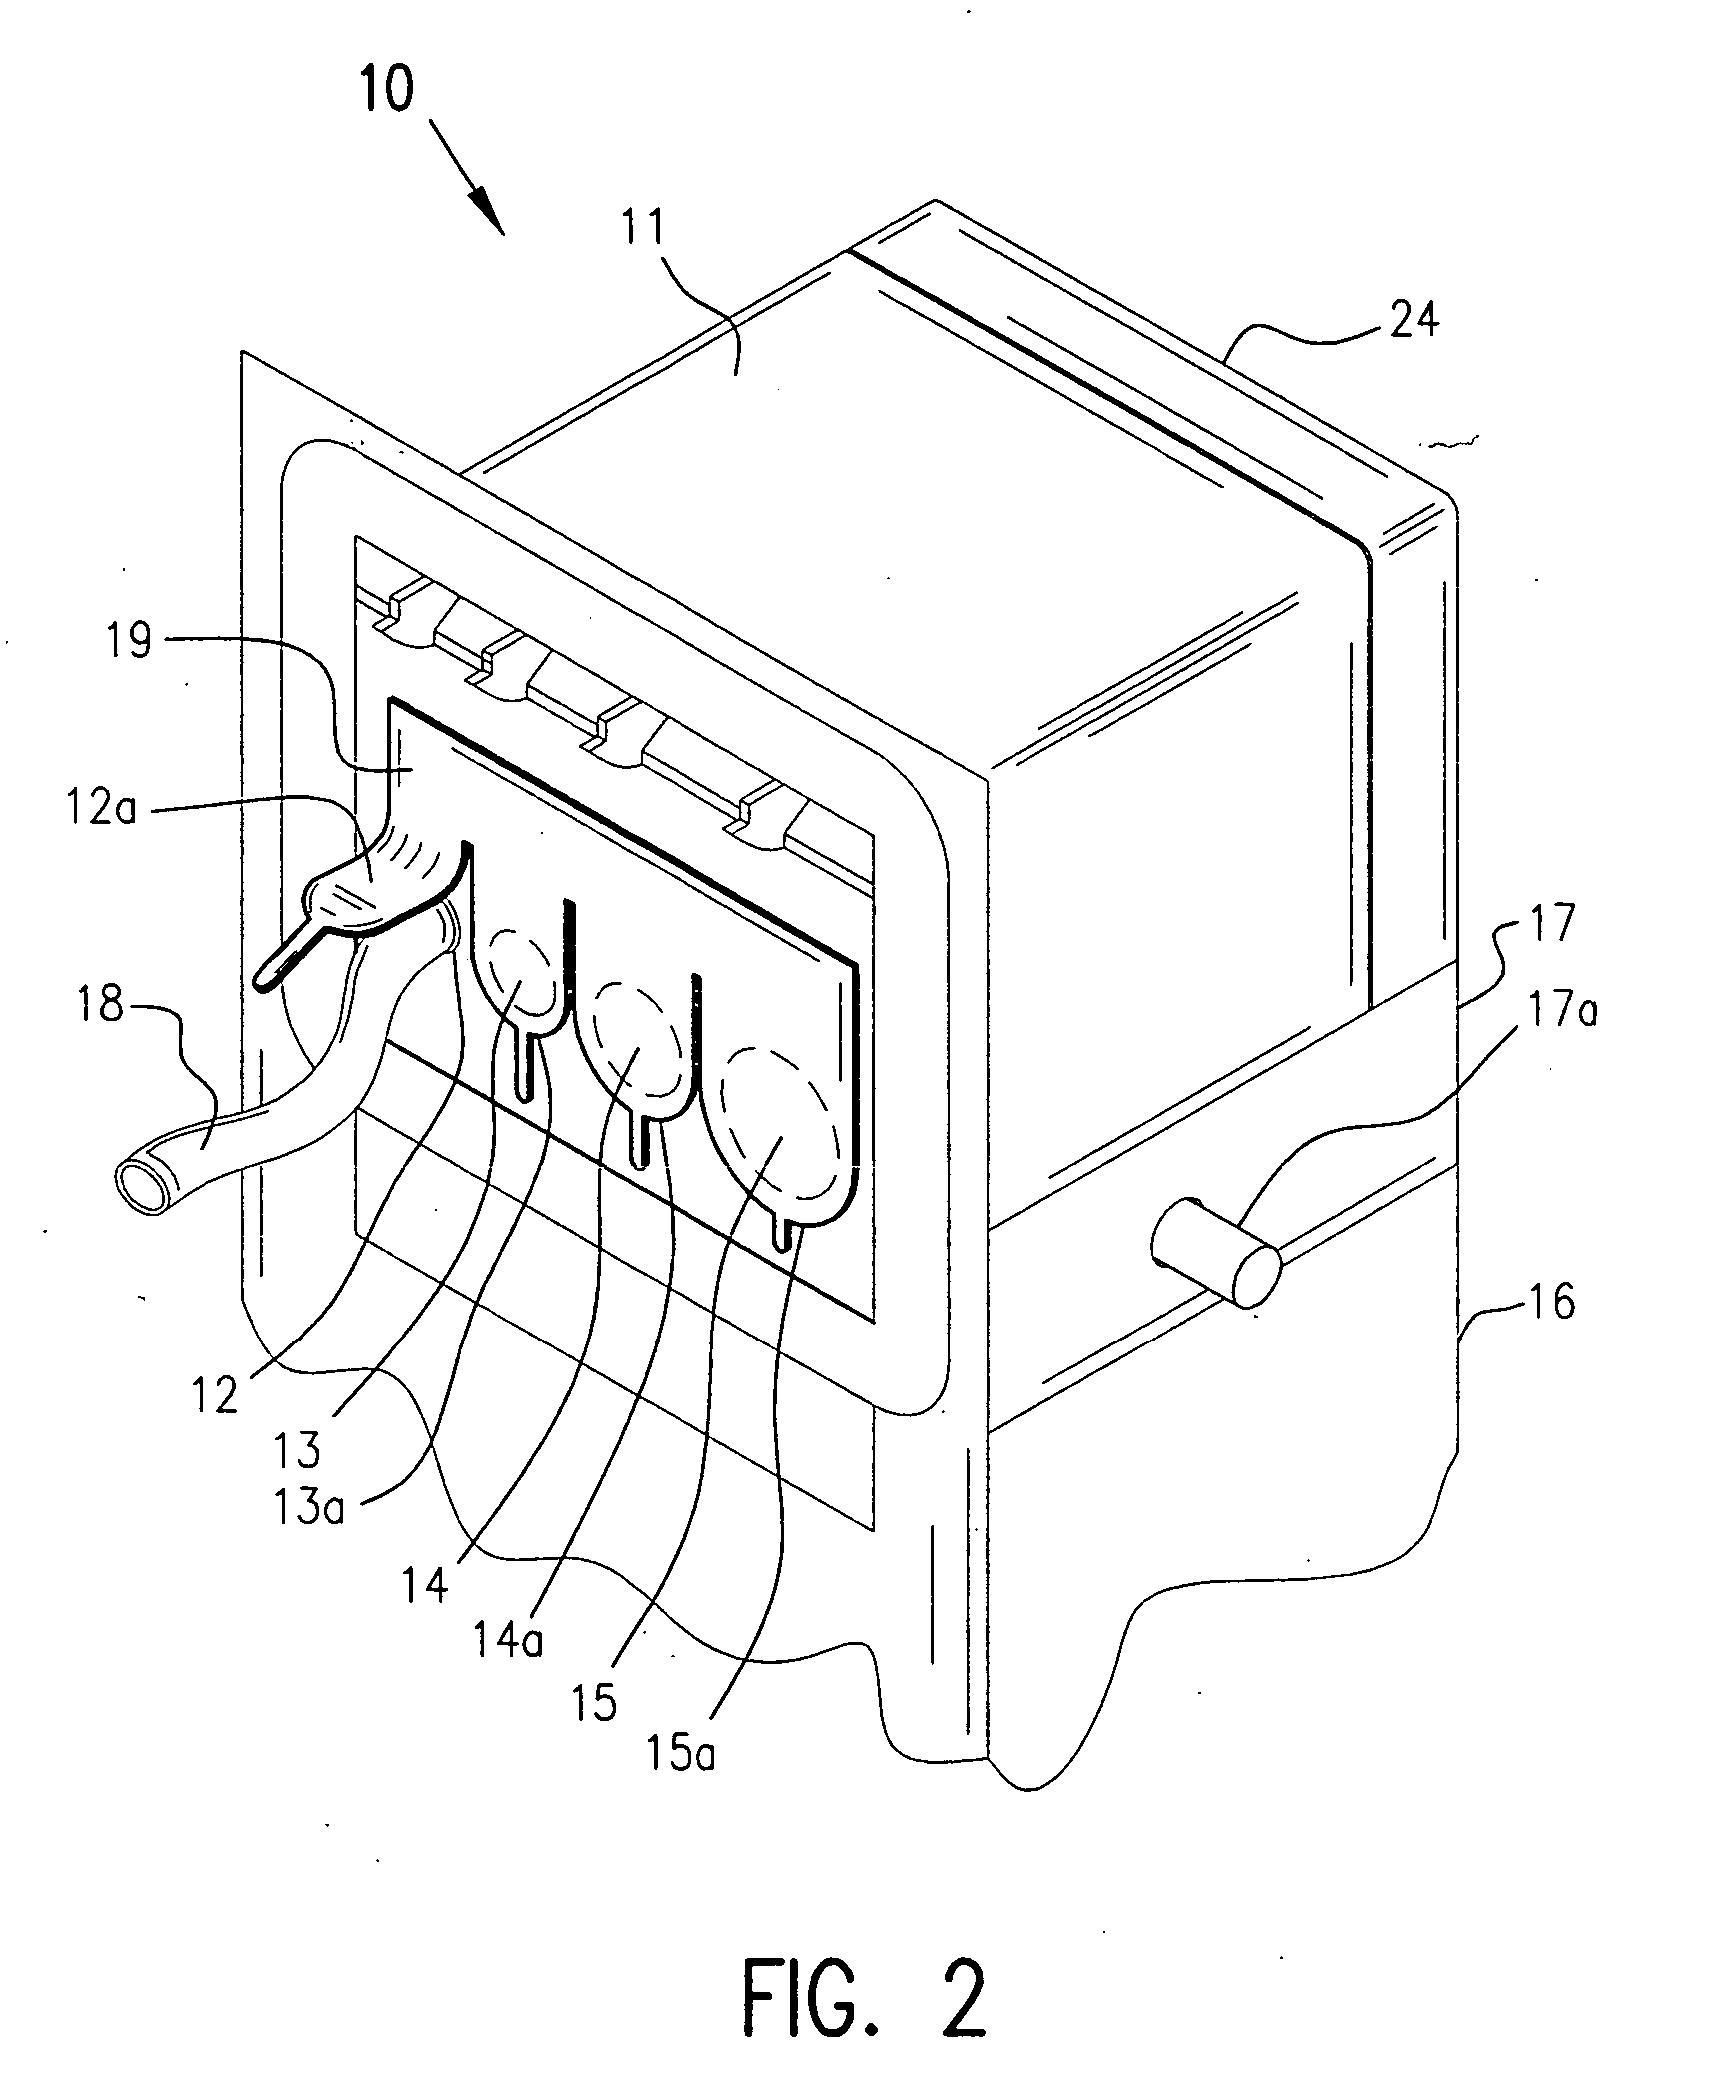 Operating room smoke evacuator with integrated vacuum motor and filter